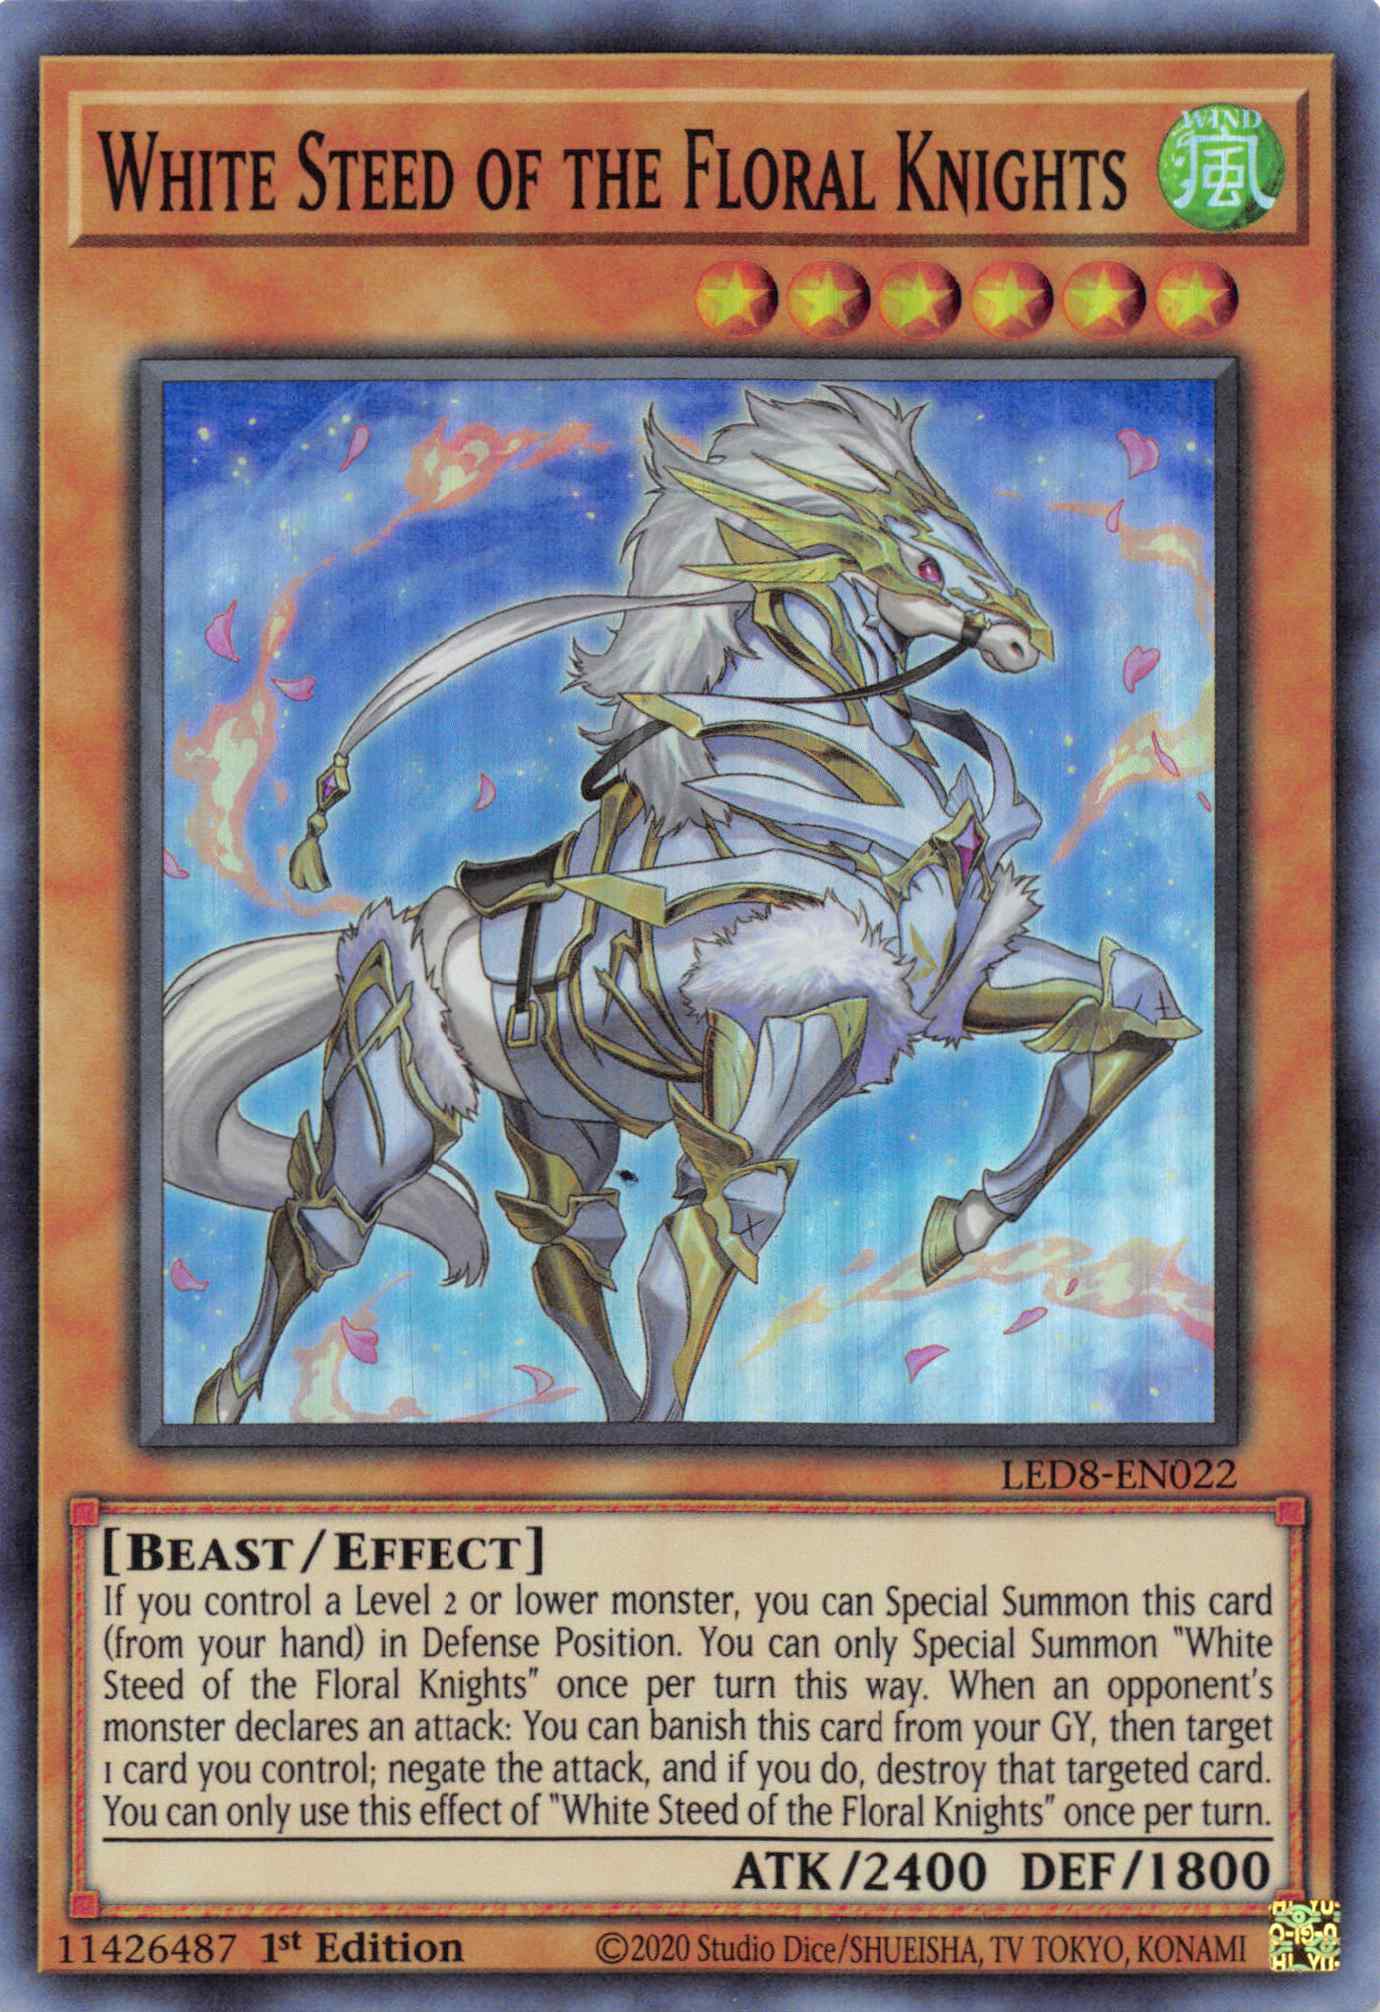 White Steed of the Floral Knights [LED8-EN022] Super Rare | Play N Trade Winnipeg